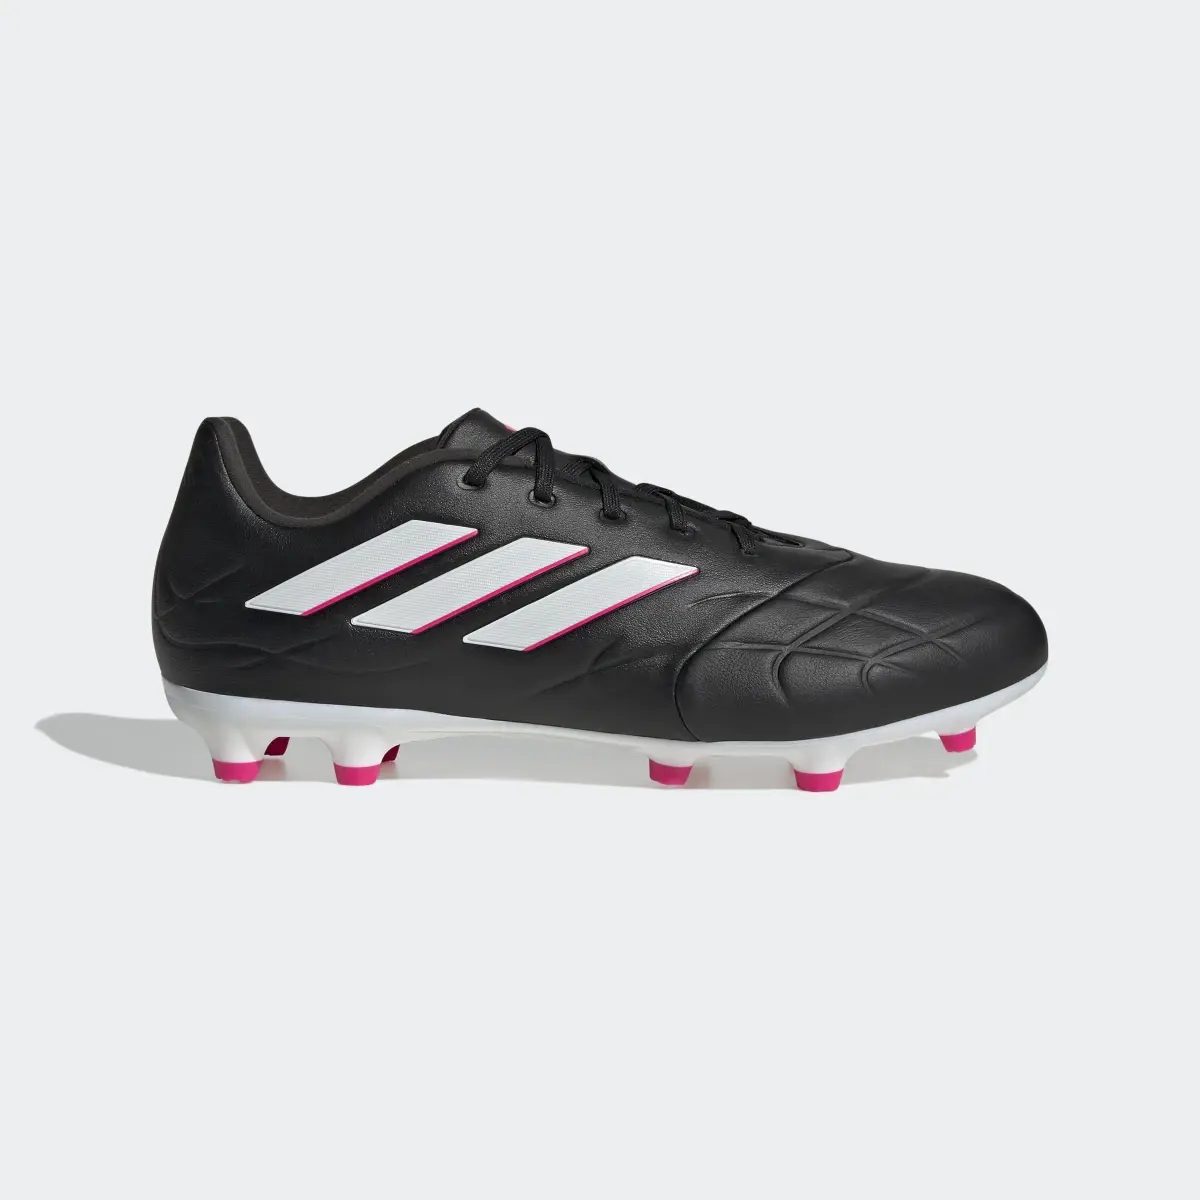 Adidas Copa Pure.3 Firm Ground Boots. 2